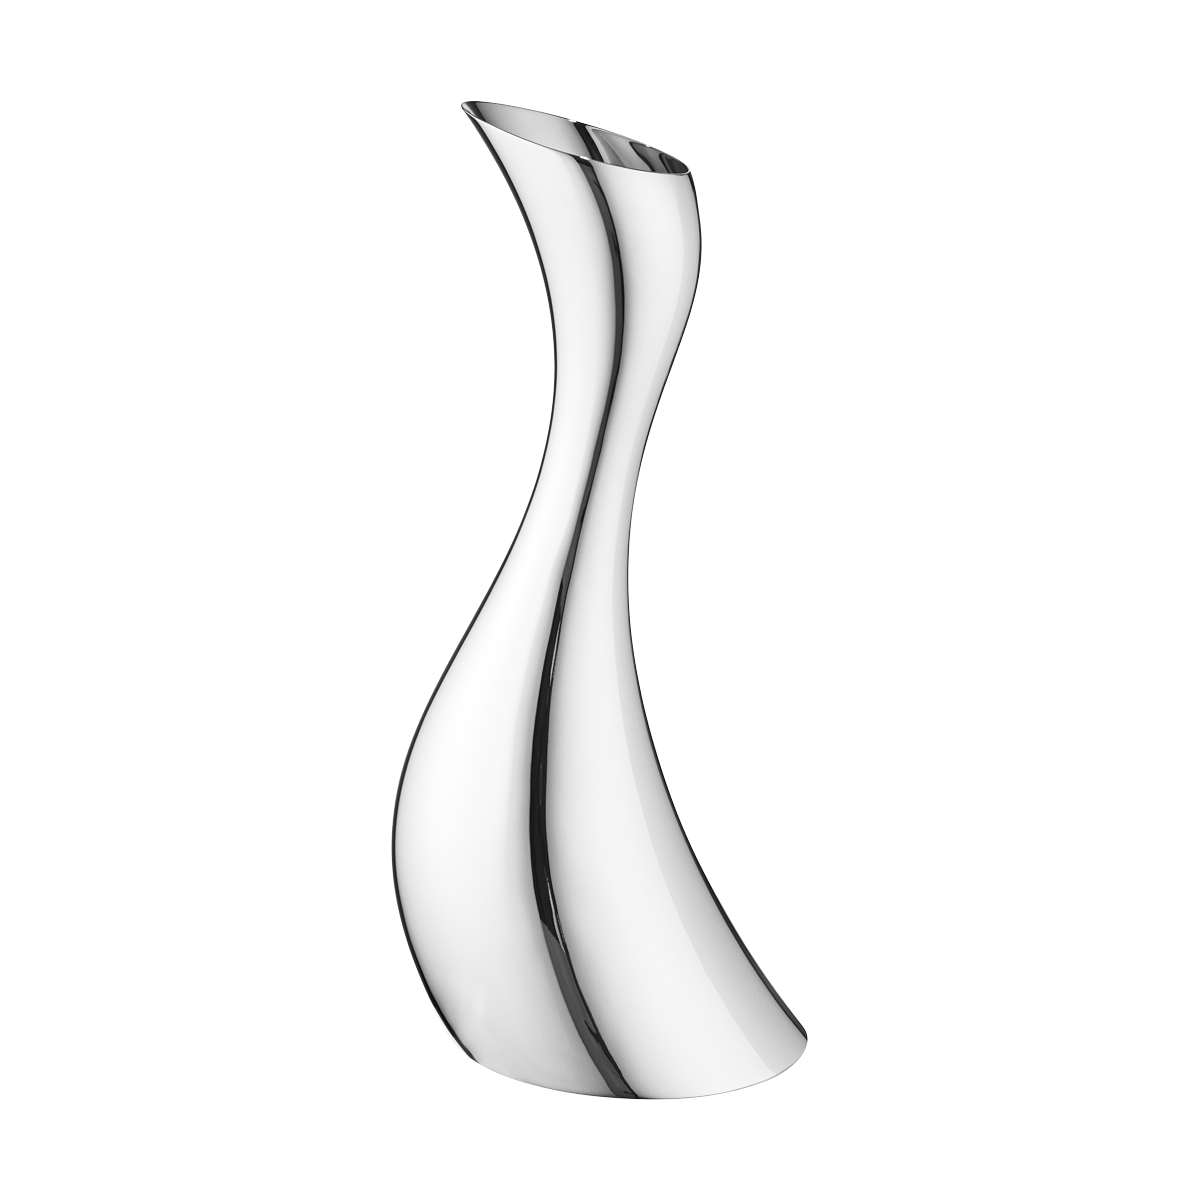 Primary image for Cobra by Georg Jensen Stainless Steel Mirror Polished Pitcher - New